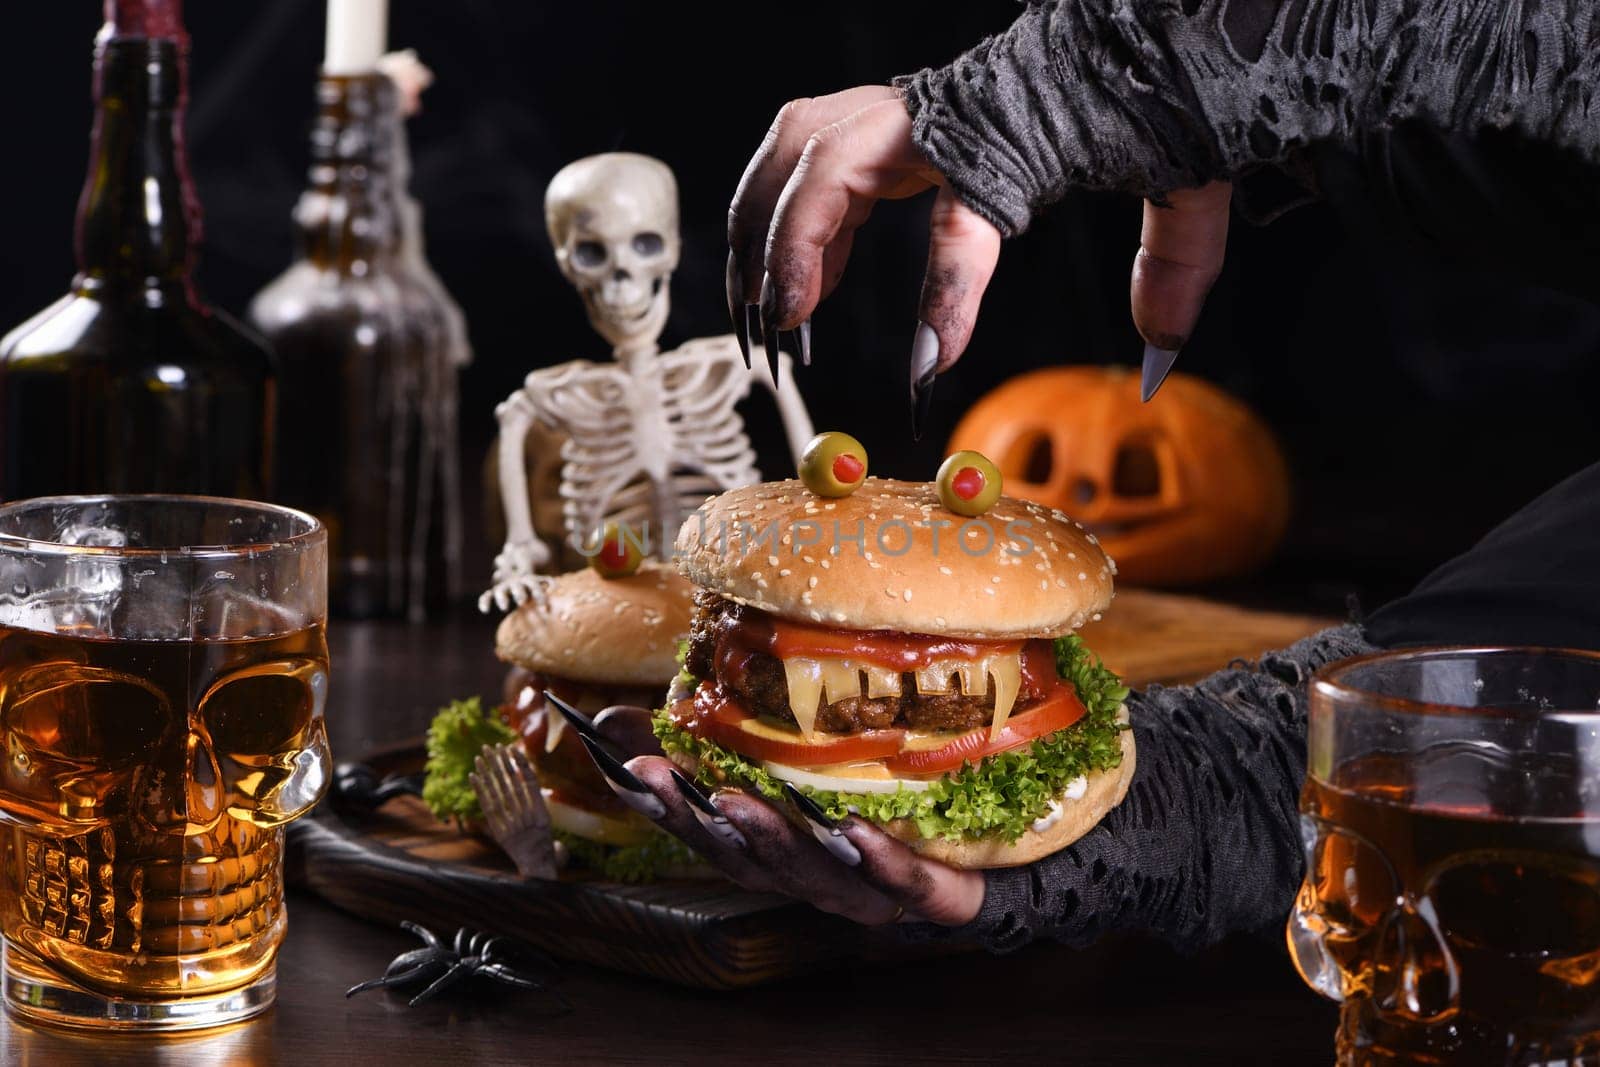 The witches hands hold a Monster Burger in her palms on a sitting skeleton. Perfect Halloween Party appetizer